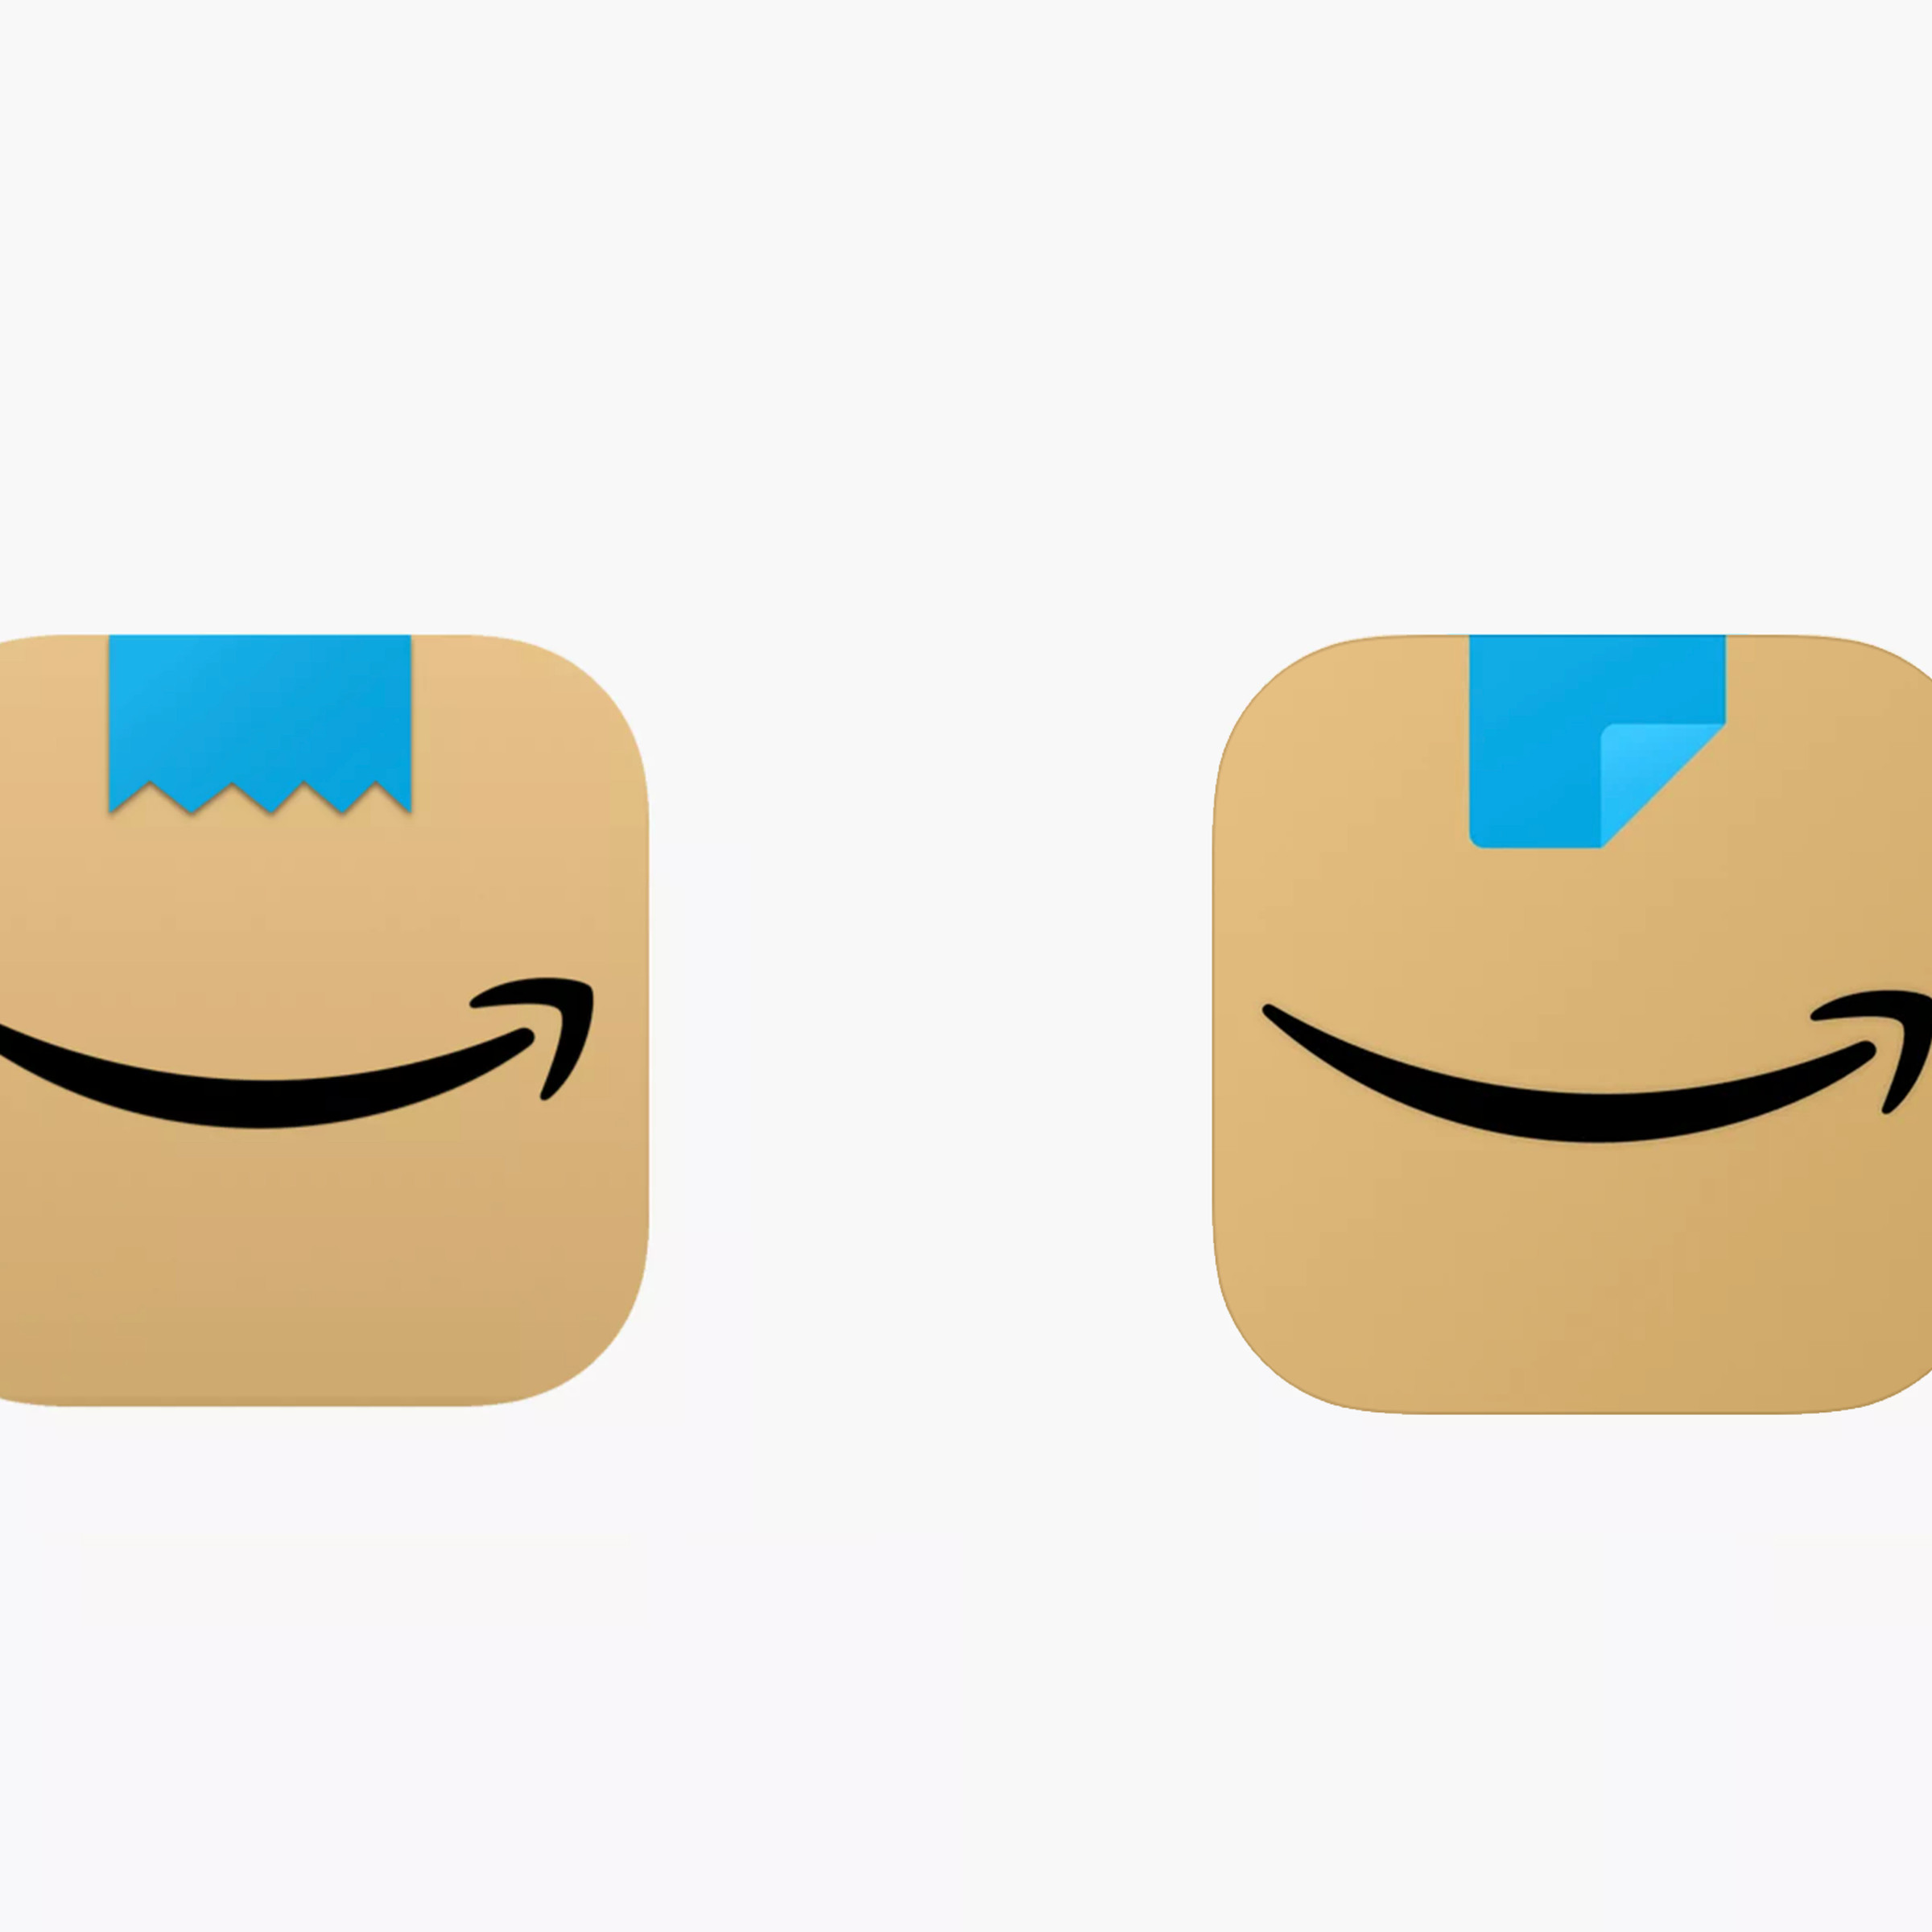 The old (left) and updated (right) versions of Amazon’s new app icon.